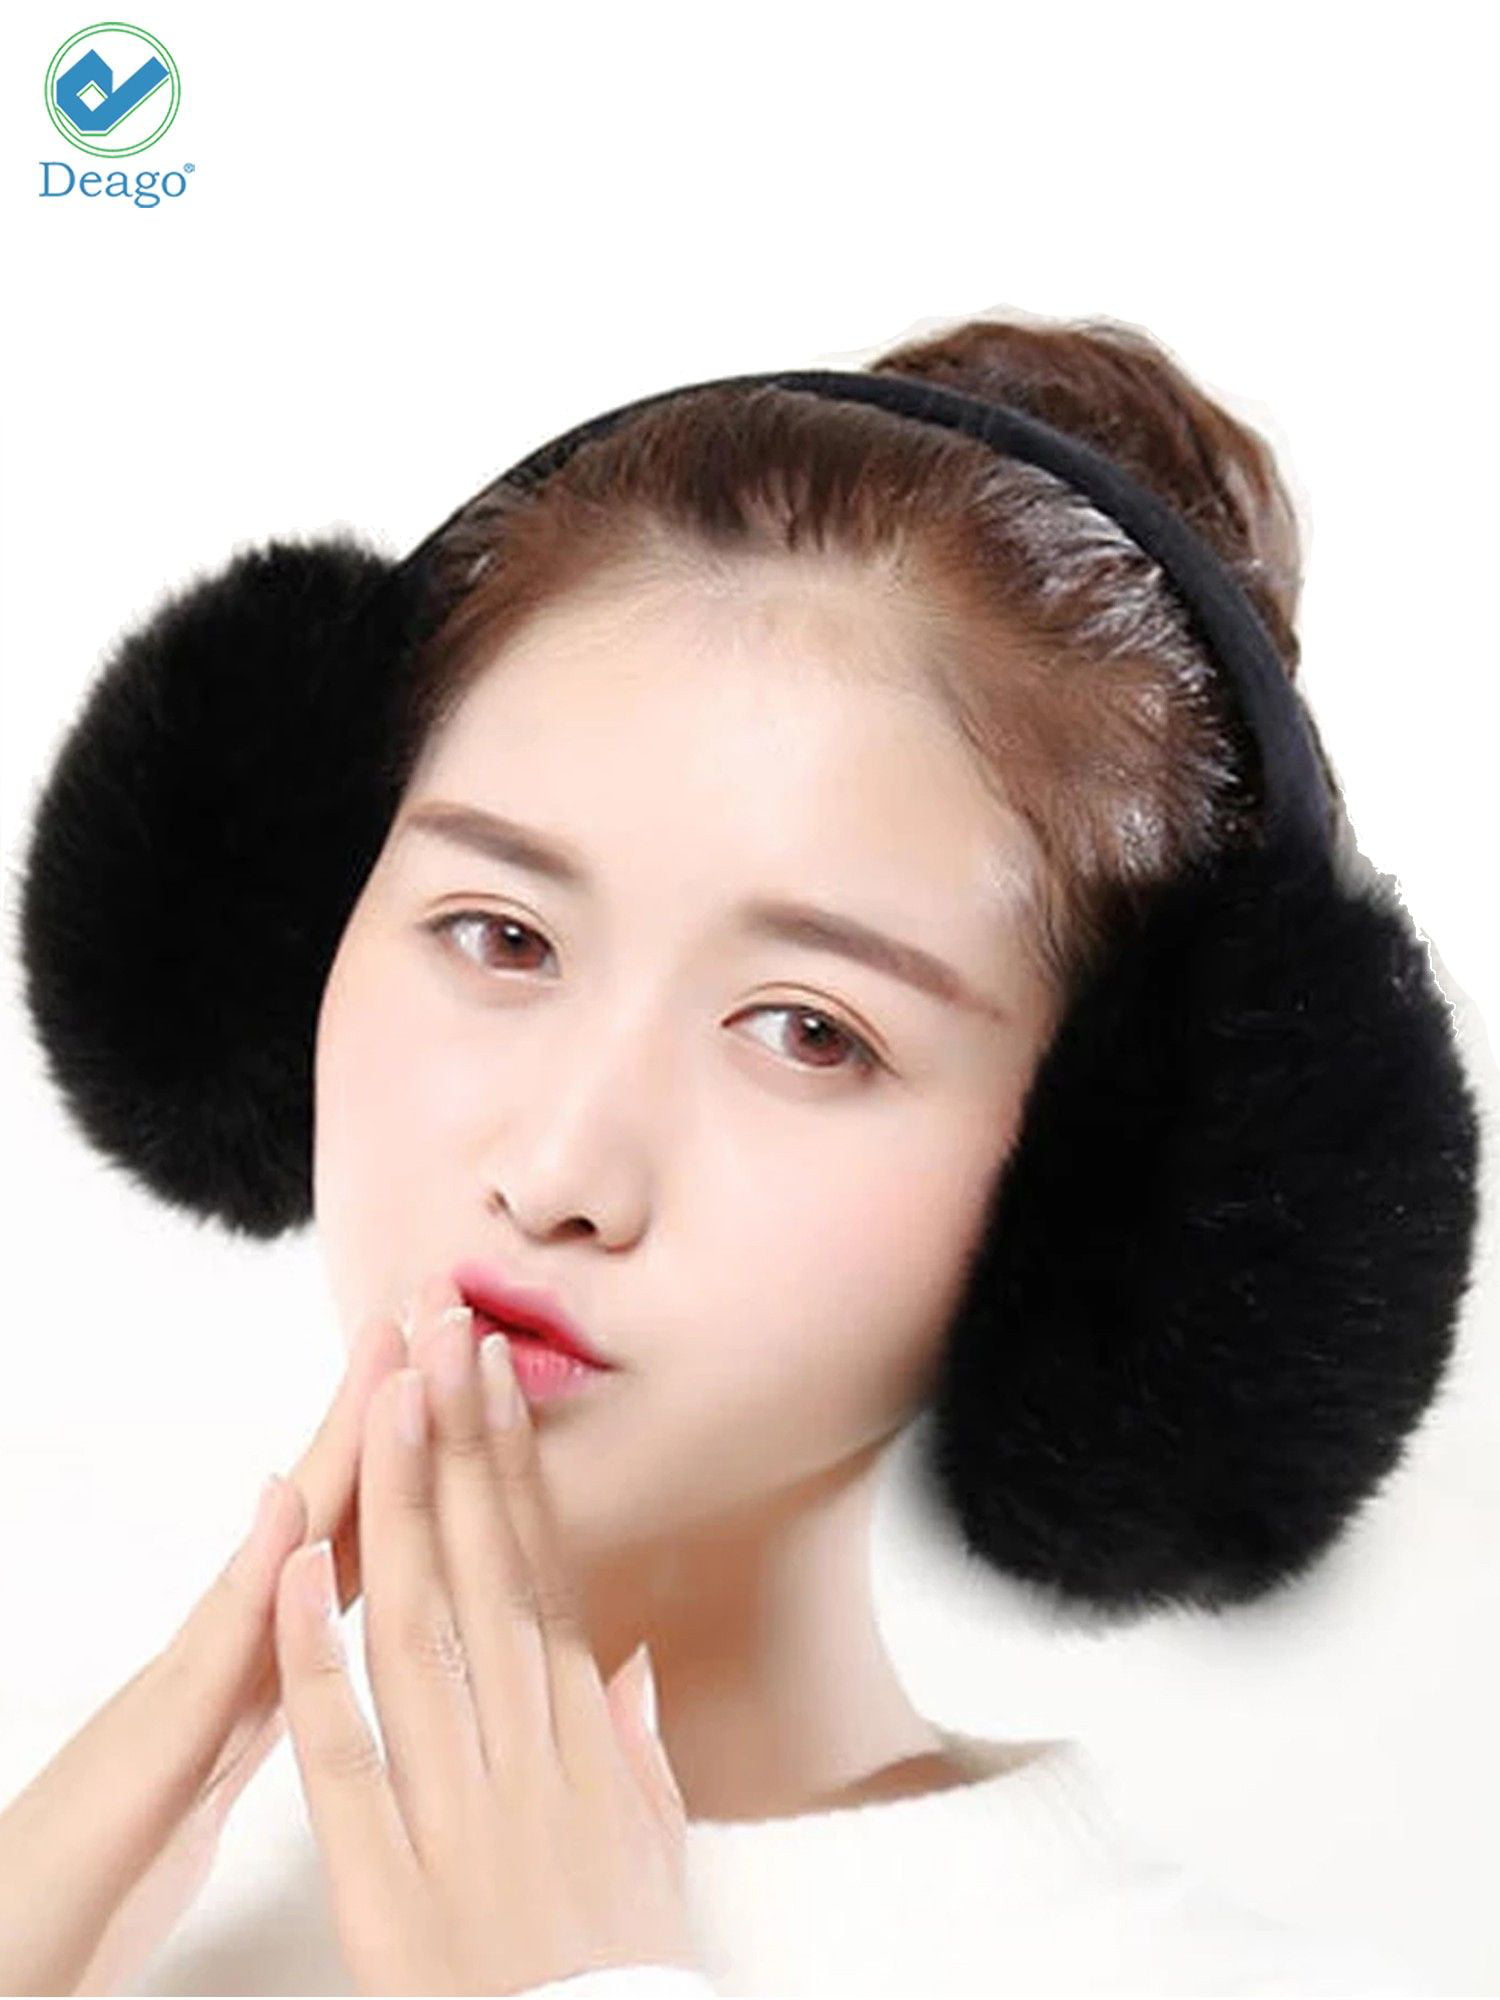 Buy DC DECORIO® latest Style Cute Winter & Outdoor Adjustable Ear Muffs Ear  Warmer Minnie Style for Girls and Women (BLACK) at .in